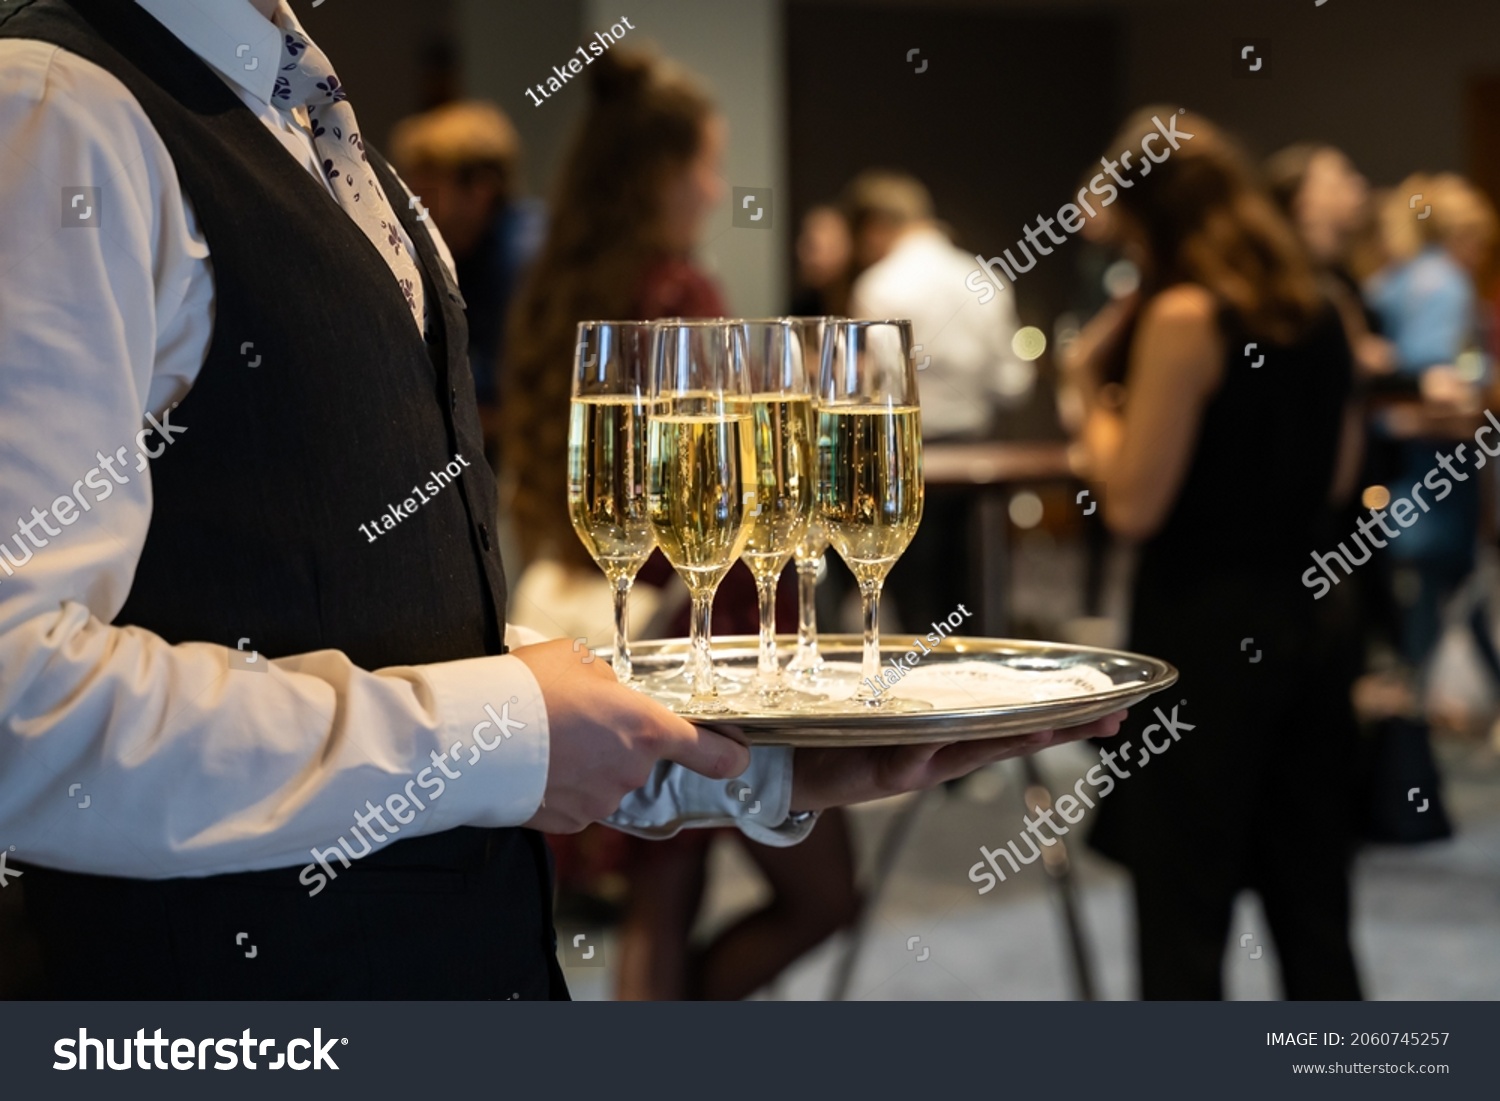 A waiter is holding a plate with sparkling wine to welcome people at an event. Glasses with champagne to toast. Drinks at a luxury party in a hotel. #2060745257